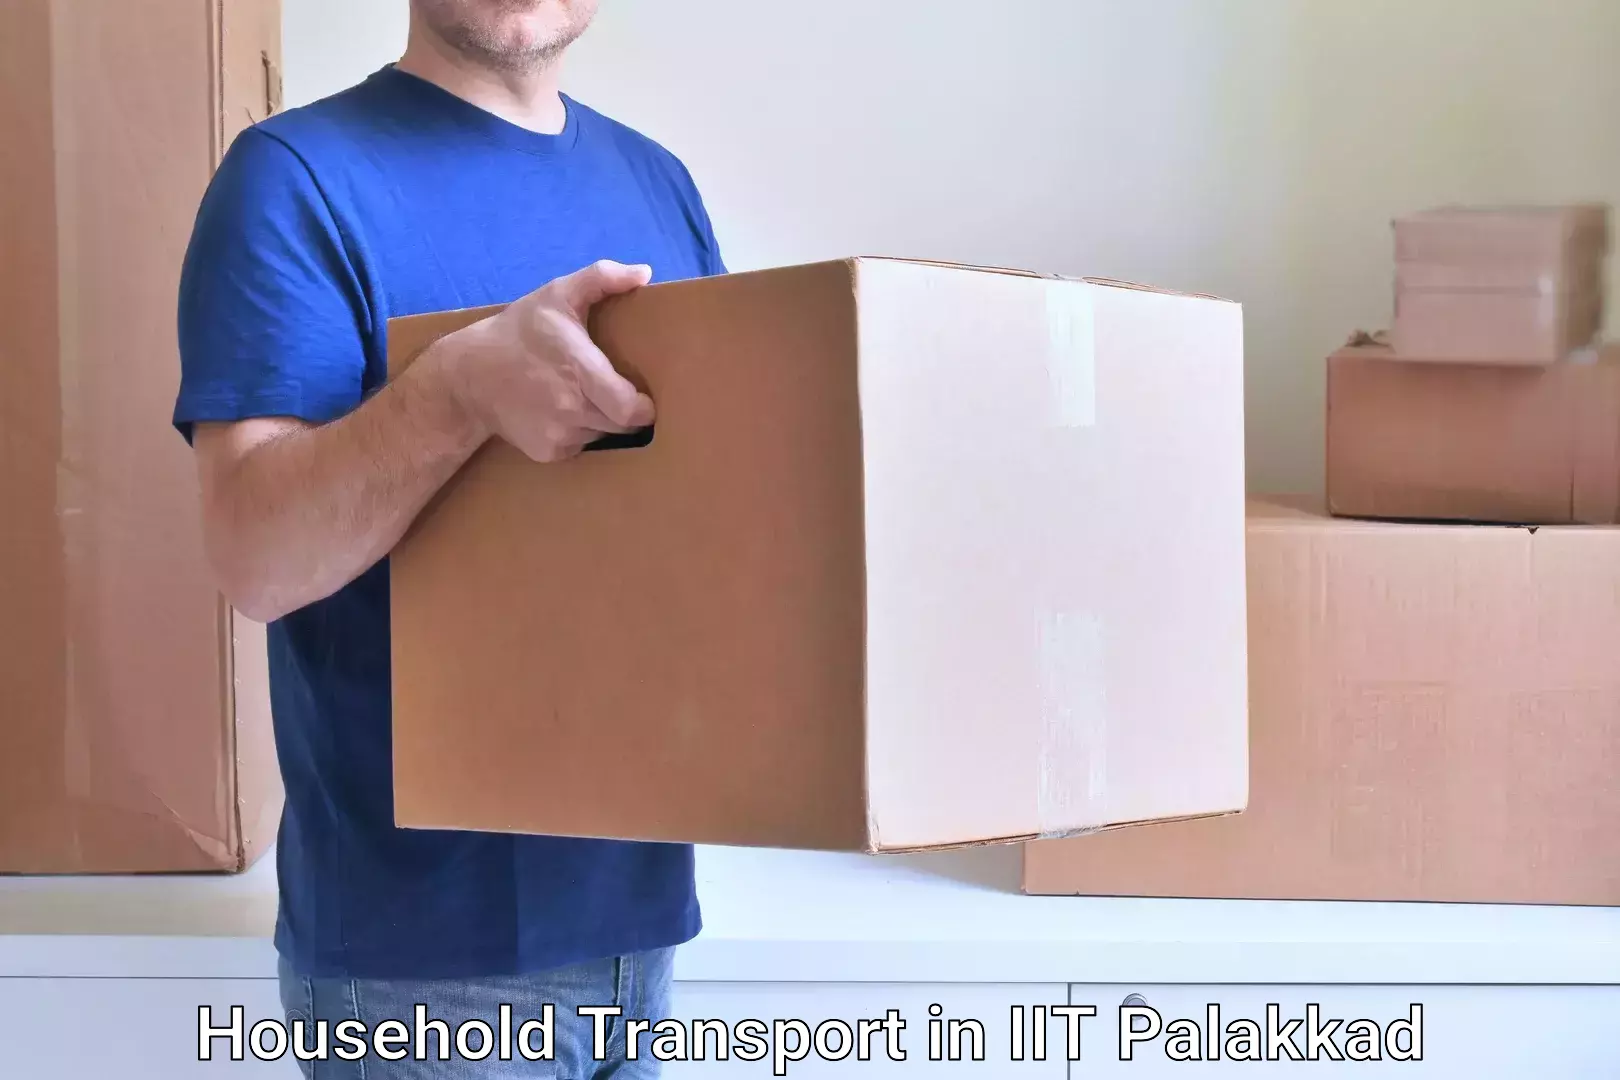 Furniture transport experts in IIT Palakkad